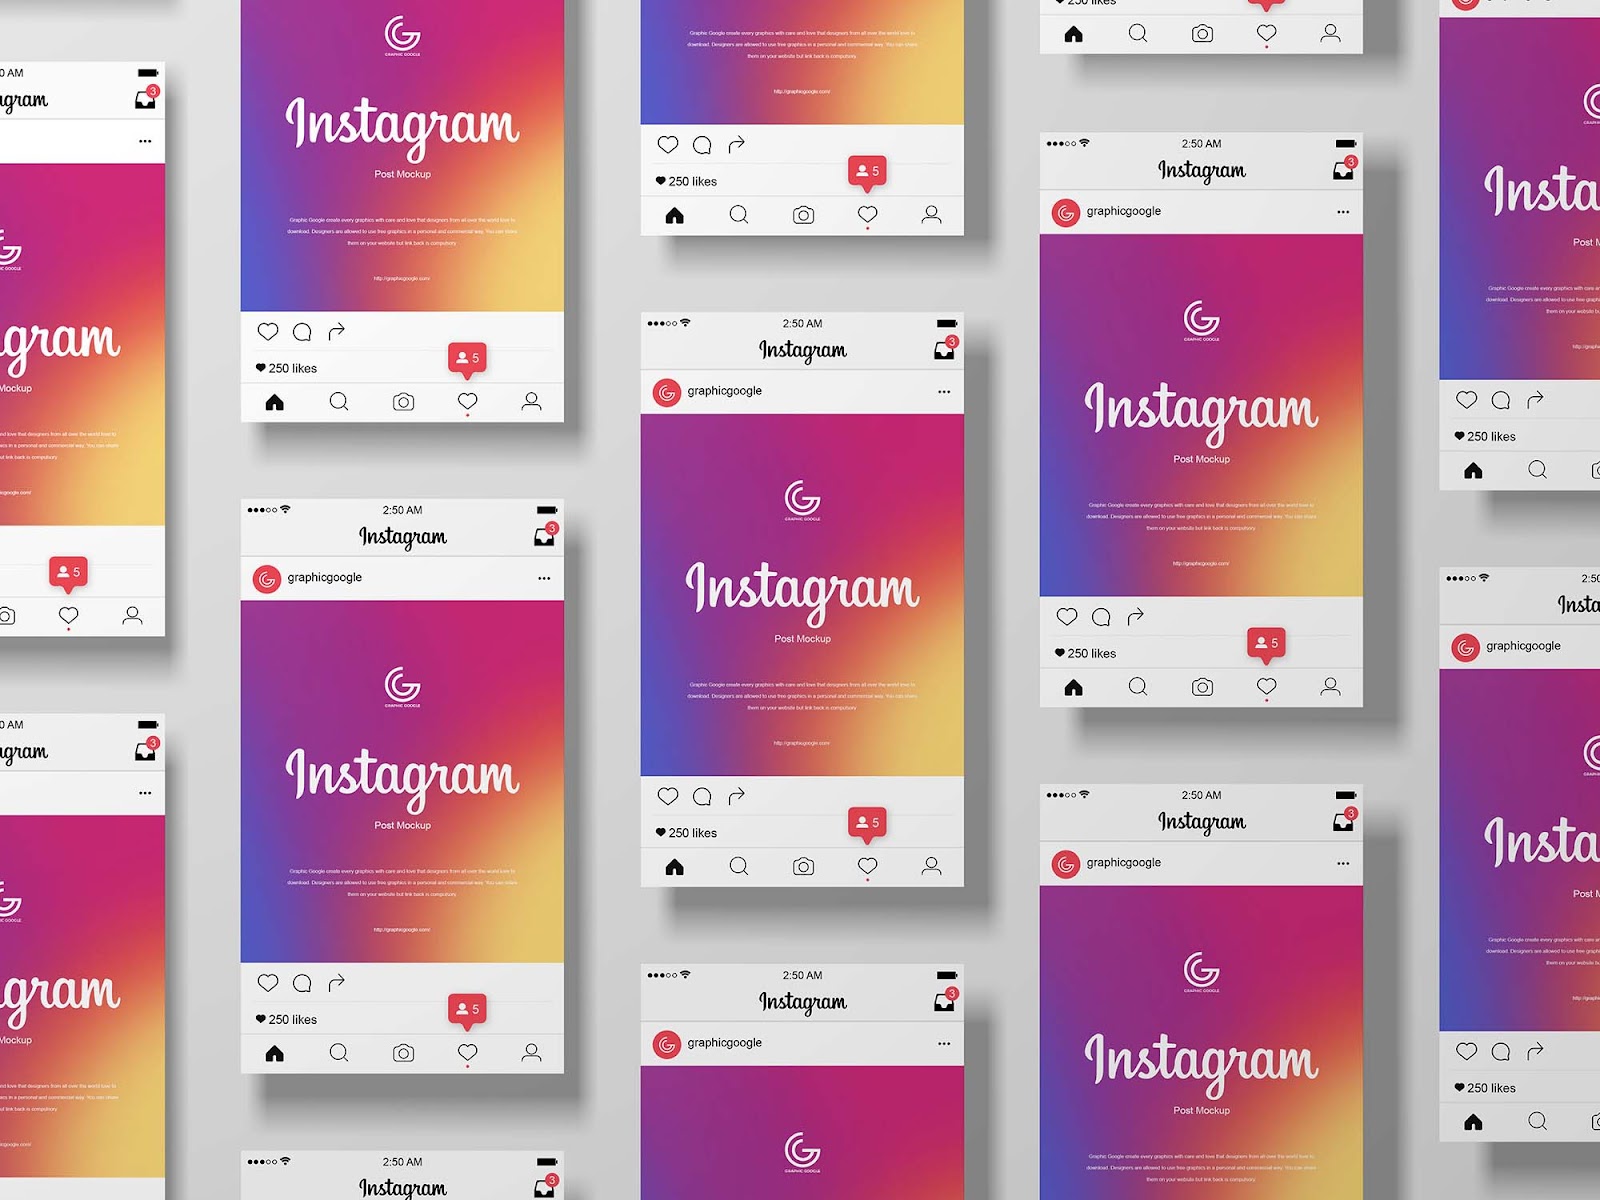 Download Download Instagram Mockup Psd Free Download Yellowimages - Free PSD Mockups Smart Object and ...